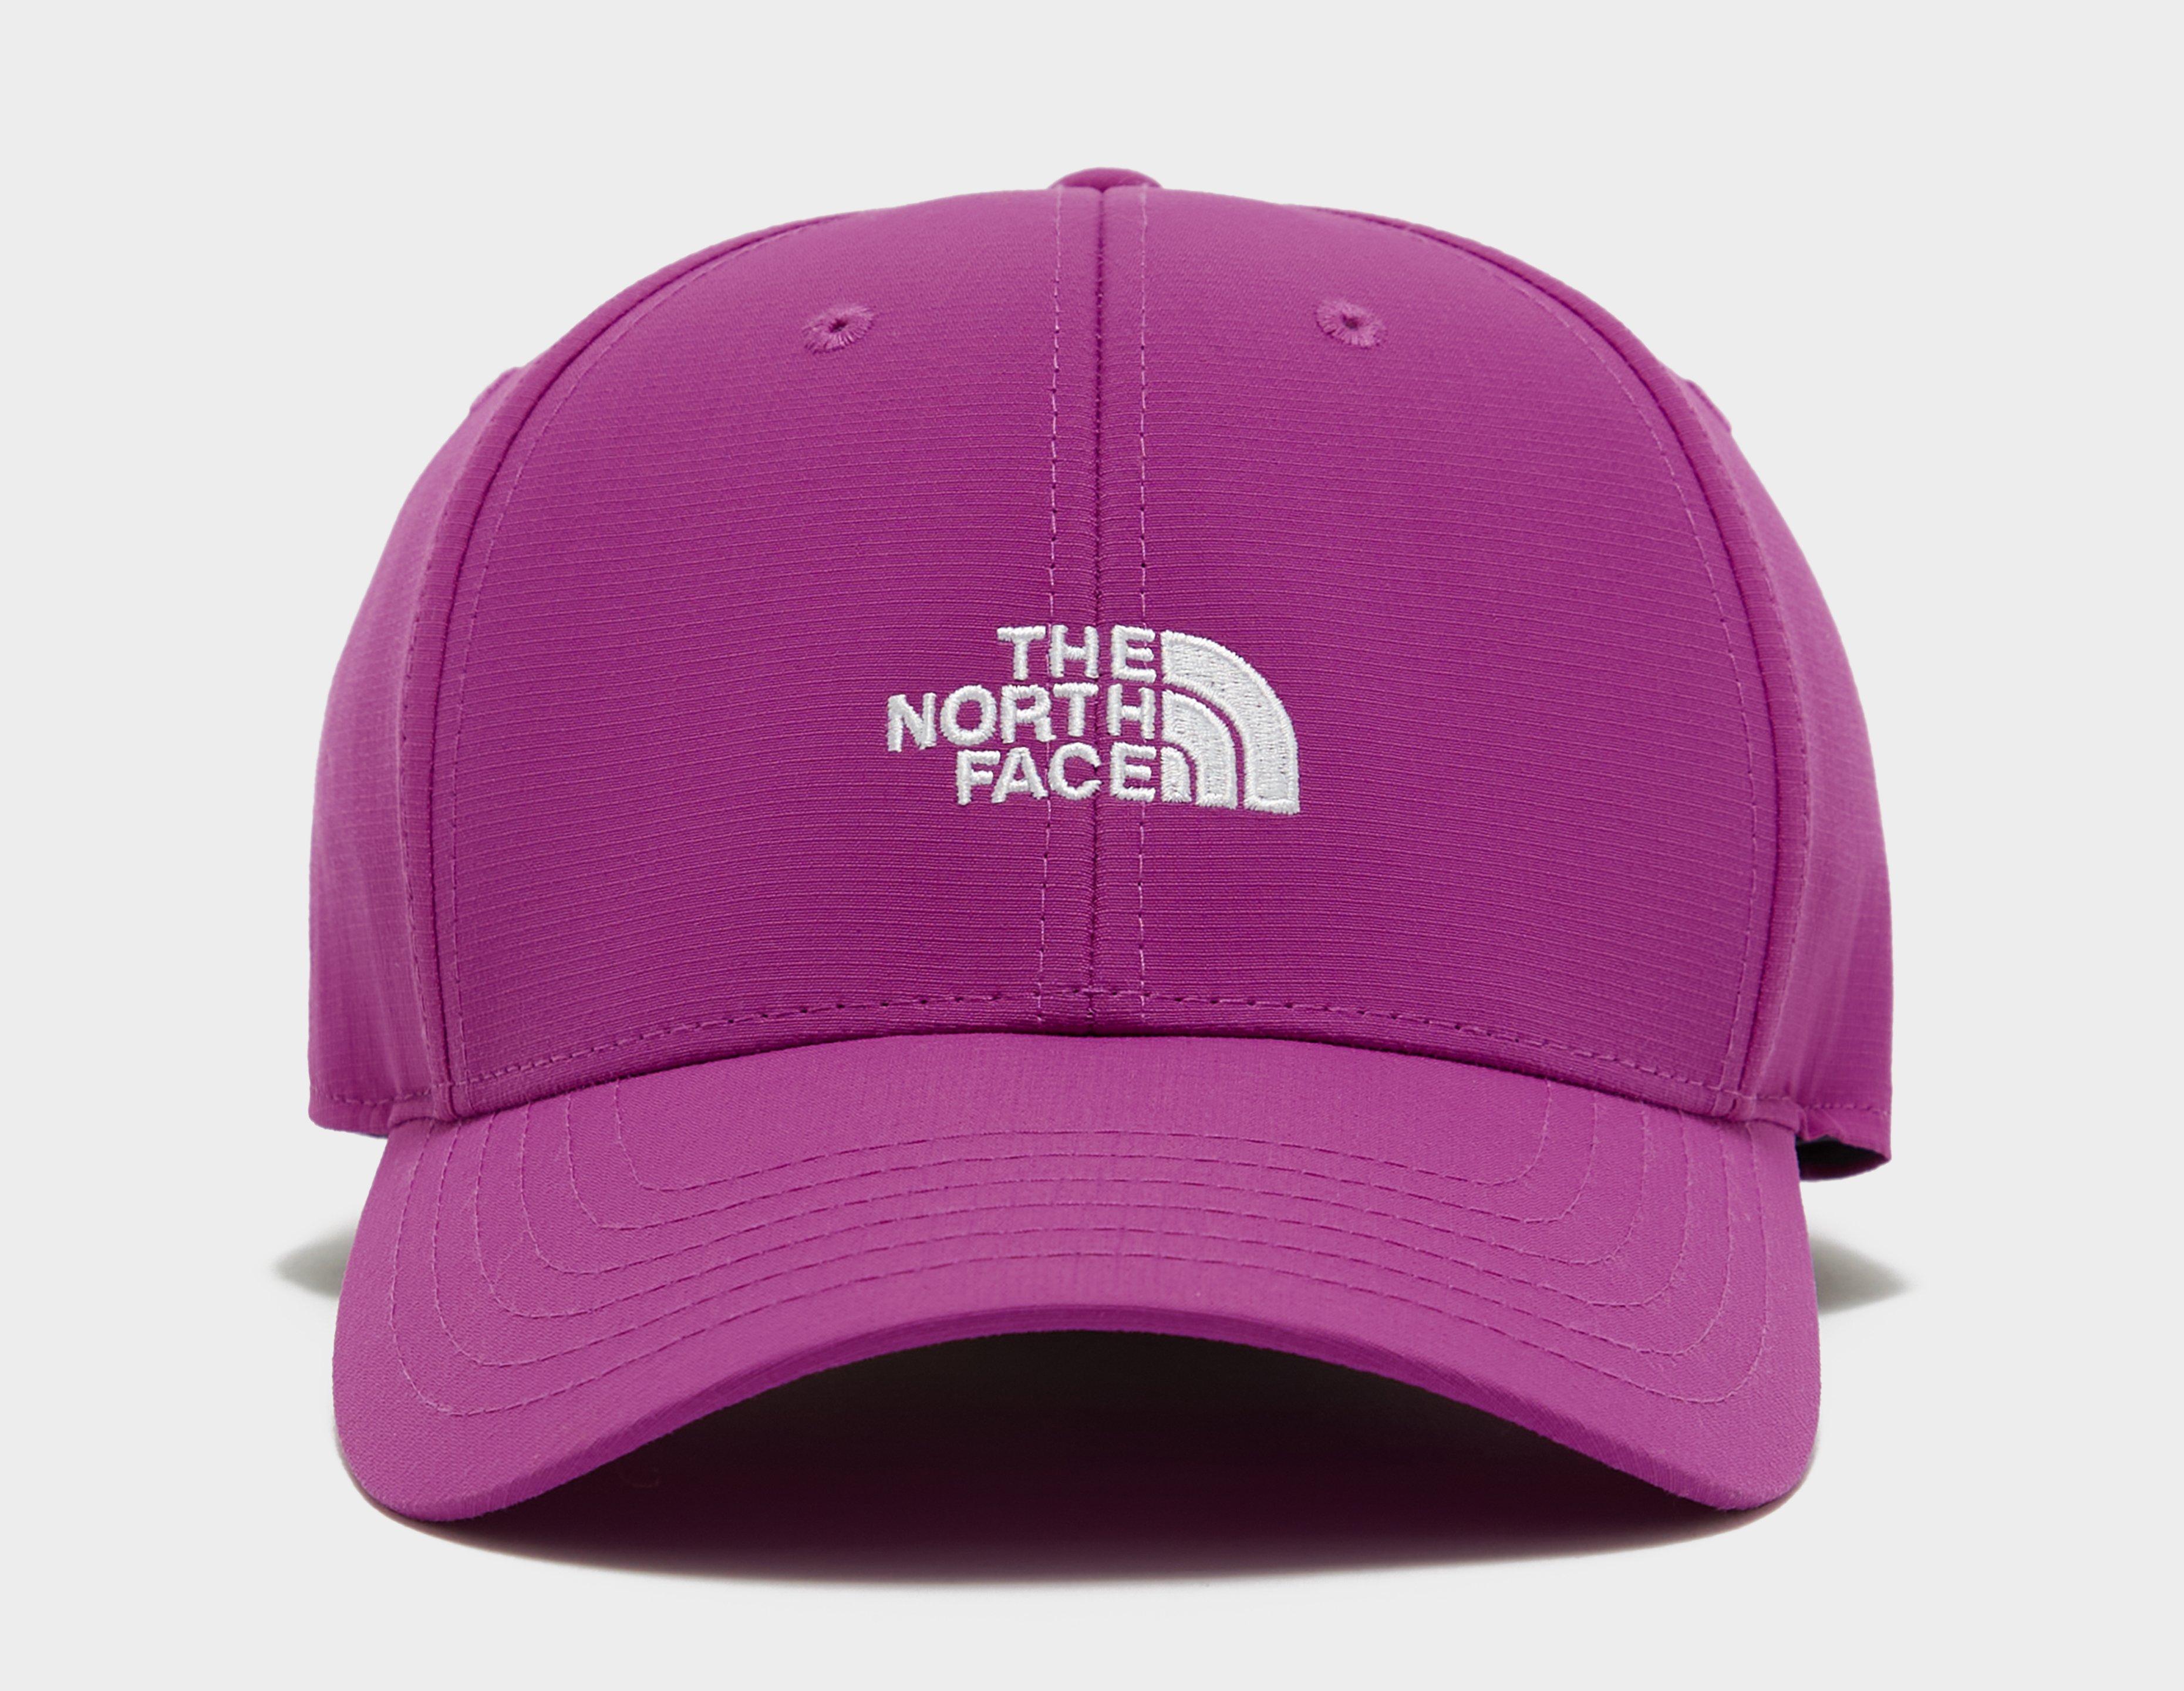 The North Face Steep Tech Cap - Nf0a4vsmrr81 - Sneakersnstuff (SNS)